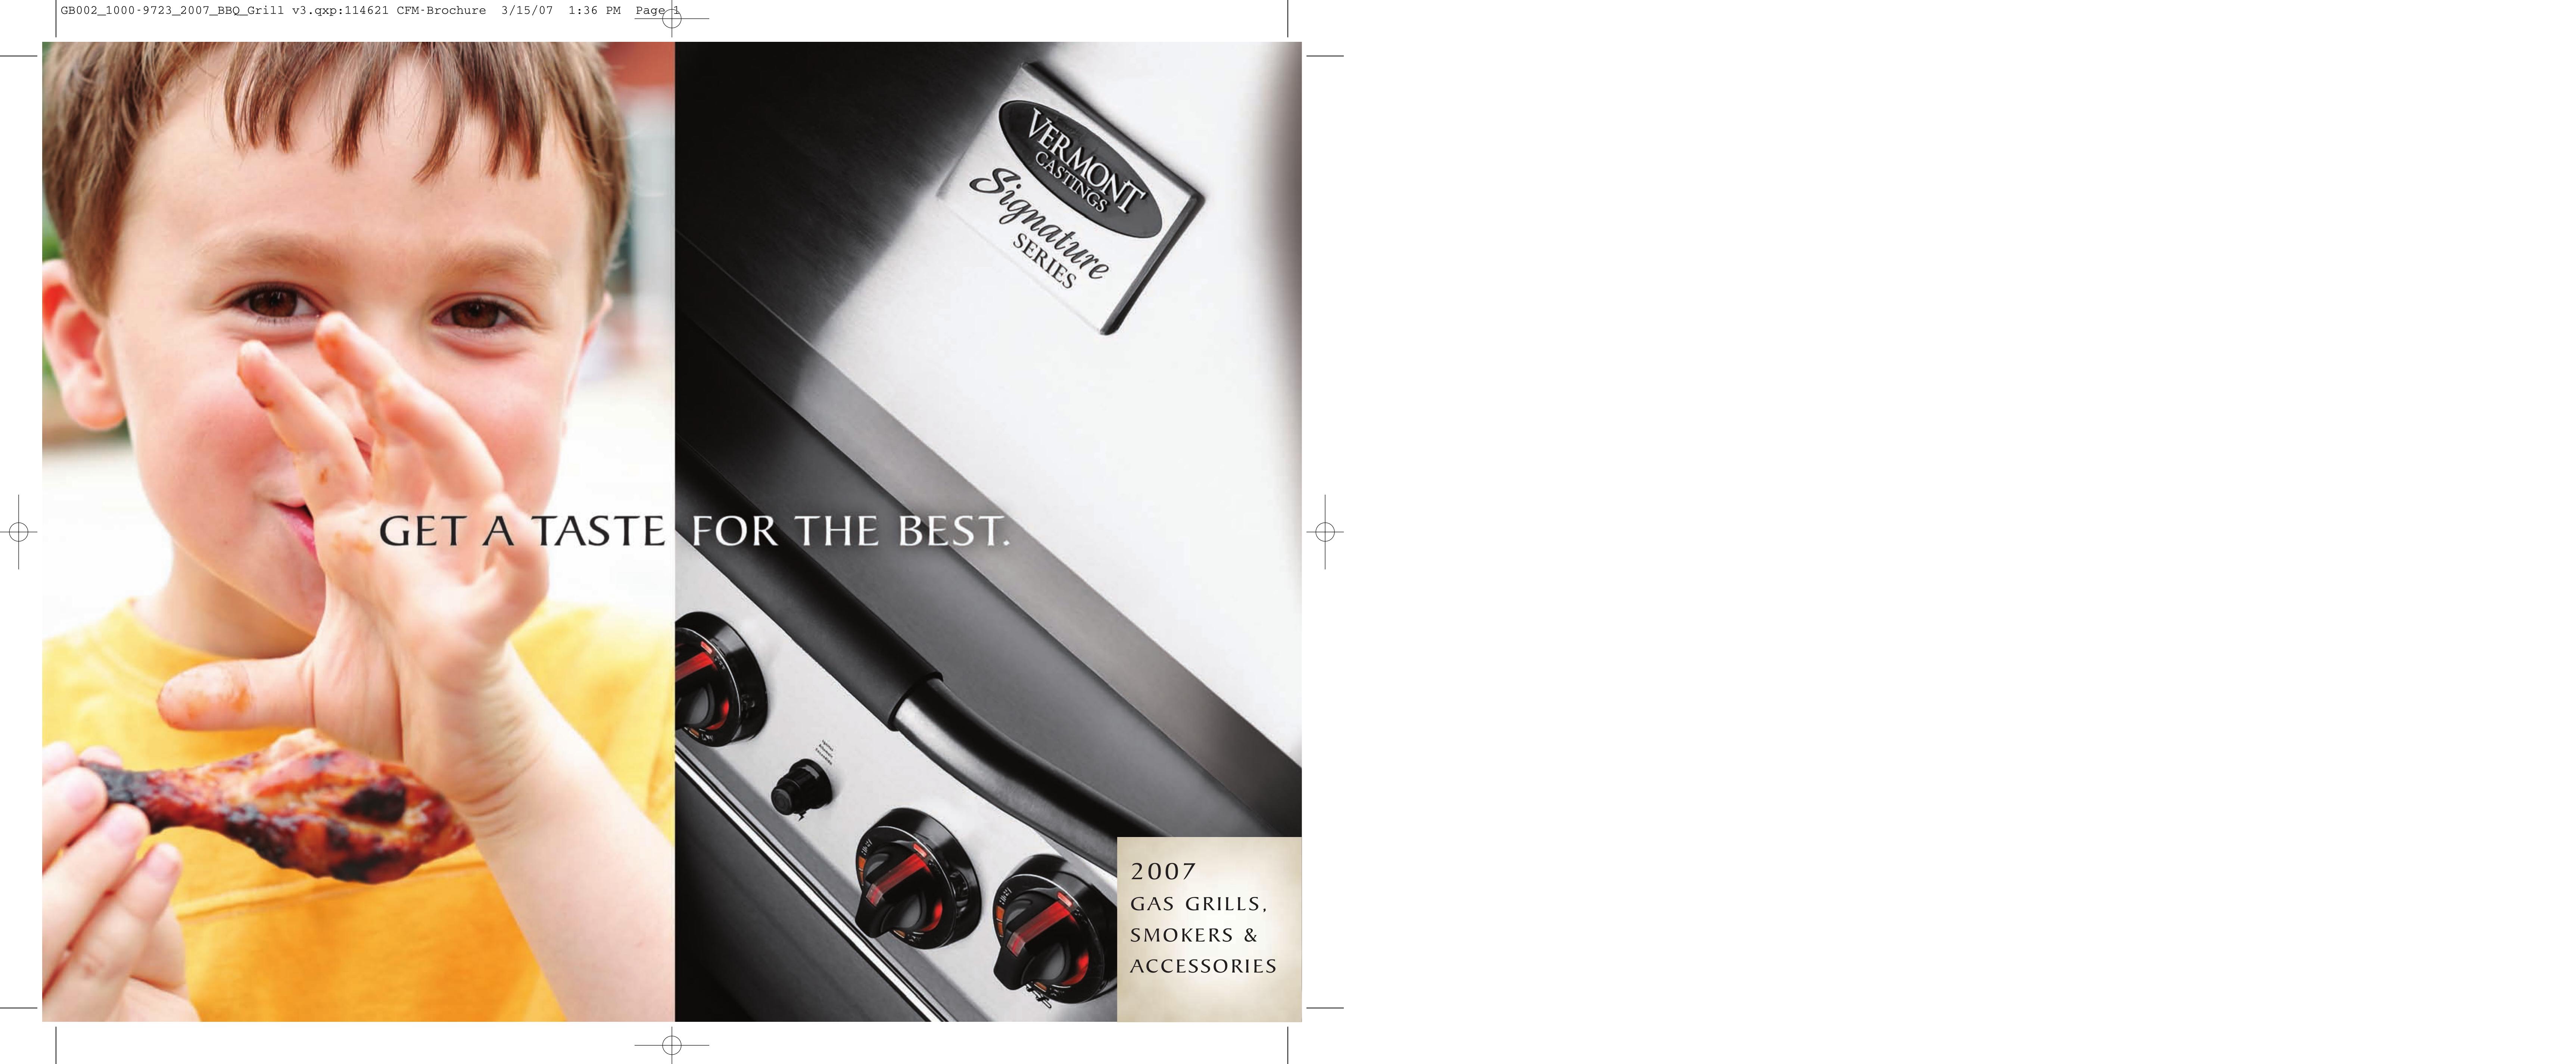 Vermont Casting VCS4037 Gas Grill User Manual